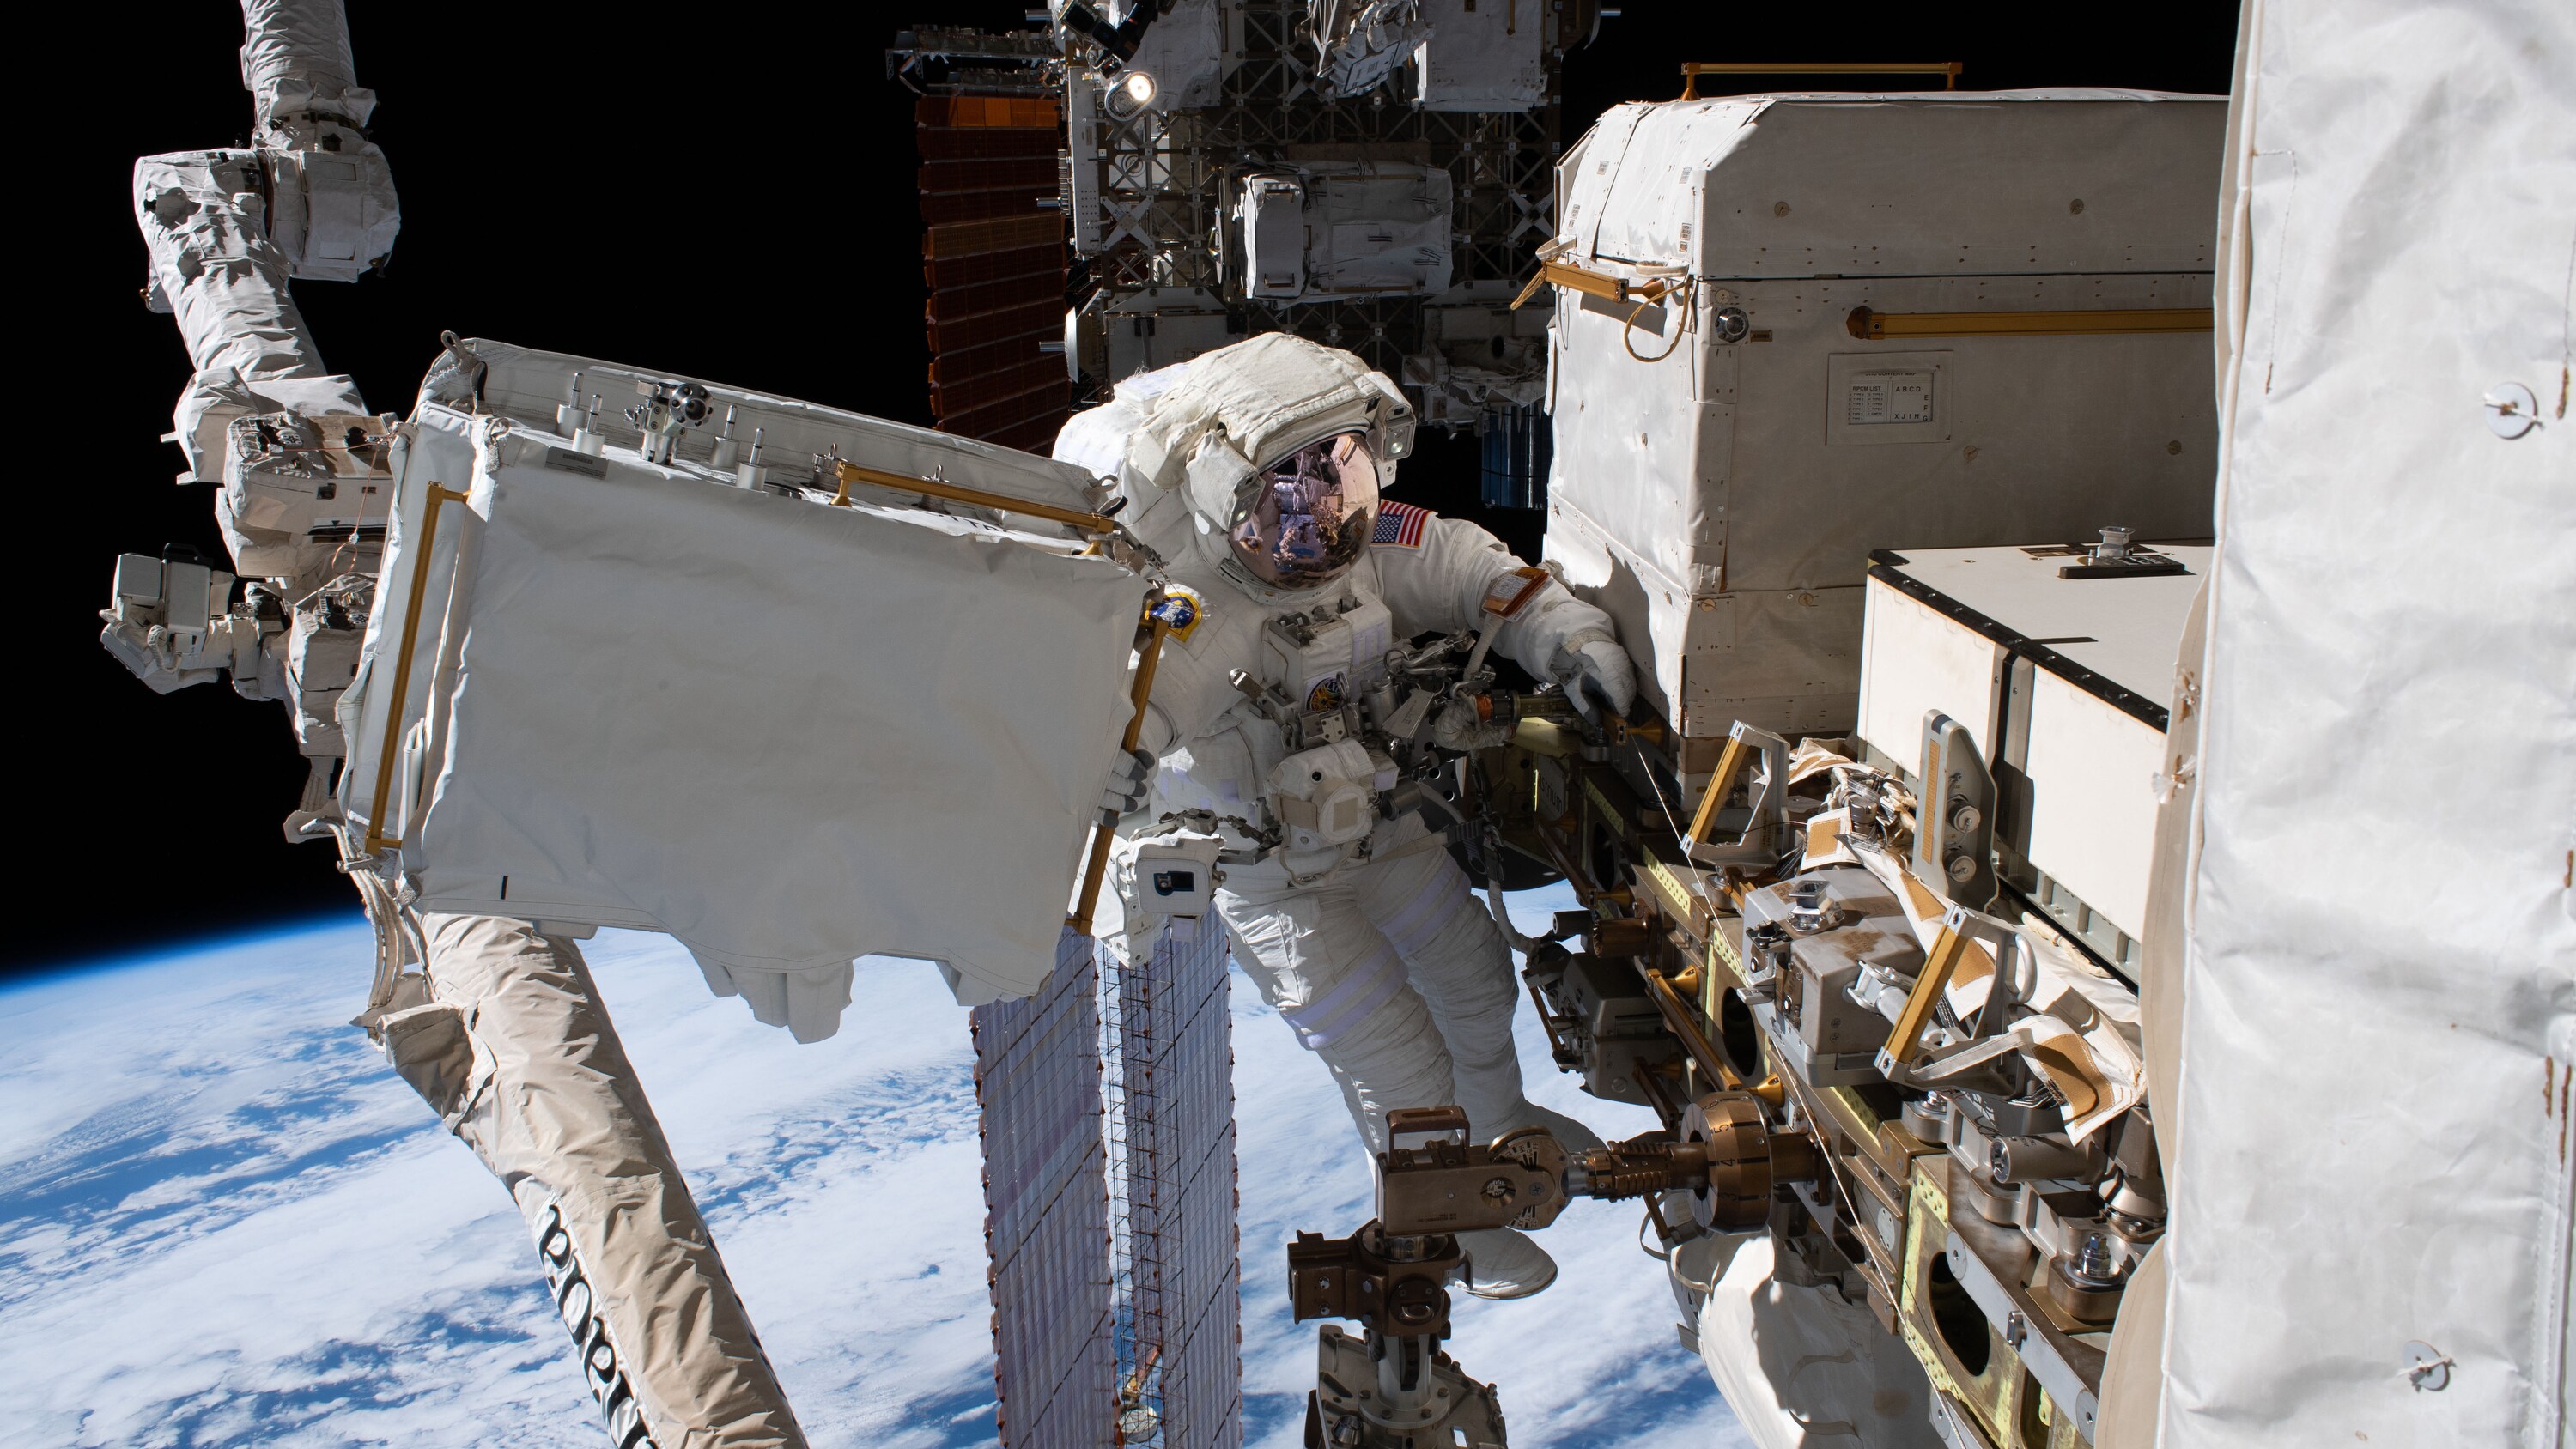 AMONG THE STARS - (Dec. 2, 2019) - NASA astronaut Andrew Morgan is tethered to the International Space Station with the Earth 250 miles below during the third spacewalk to upgrade the Alpha Magnetic Spectrometer's thermal pump system. (NASA) ANDREW MORGAN